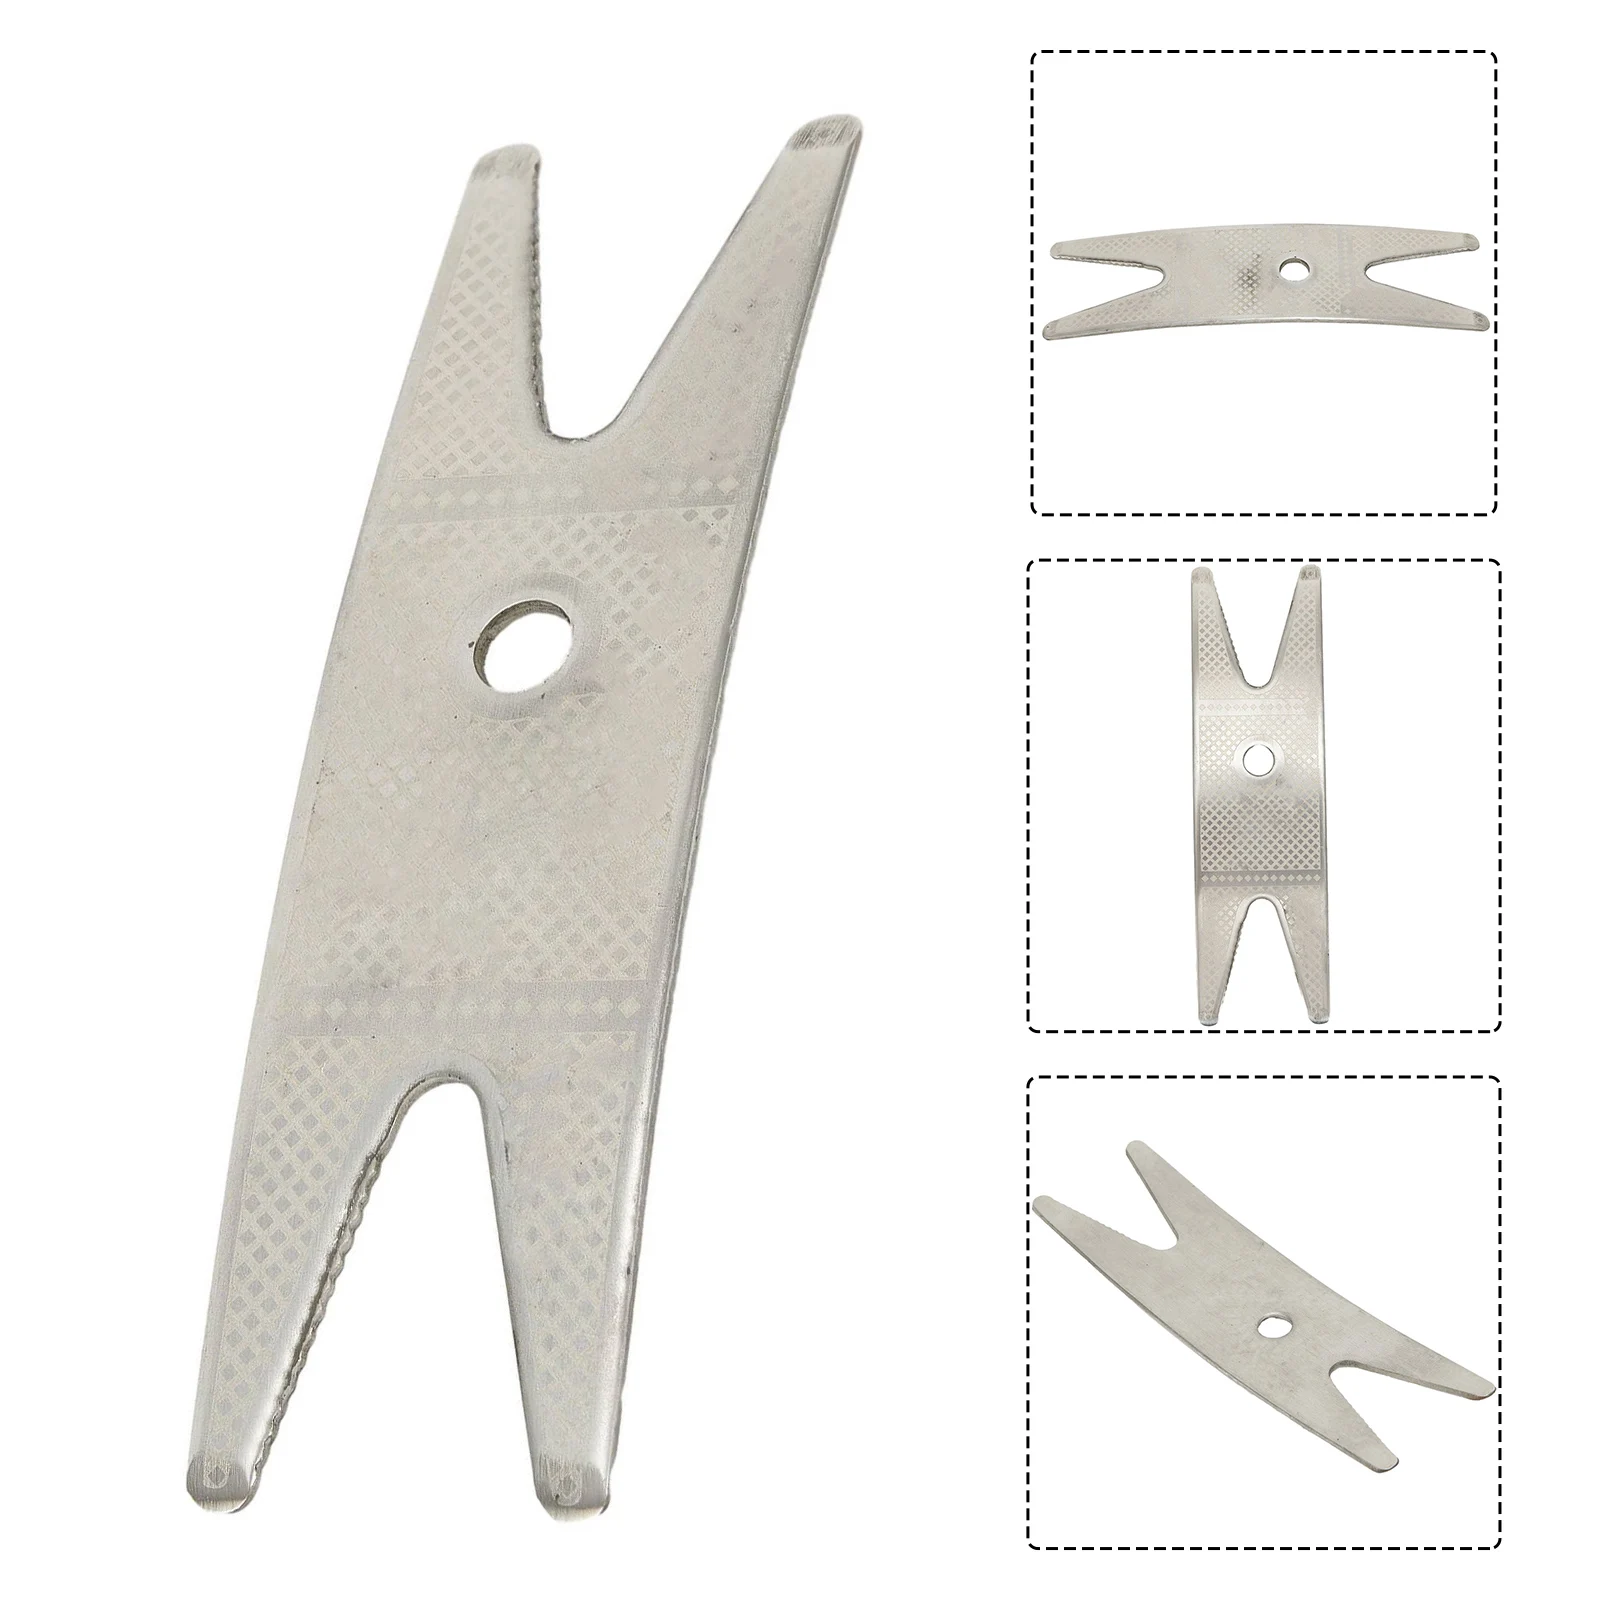 Guitar Bass Multi Spanner Wrench Luthier Tool For Tightening Pots Switches  Music Supplies For Tightening Pots Switches Jacks - AliExpress